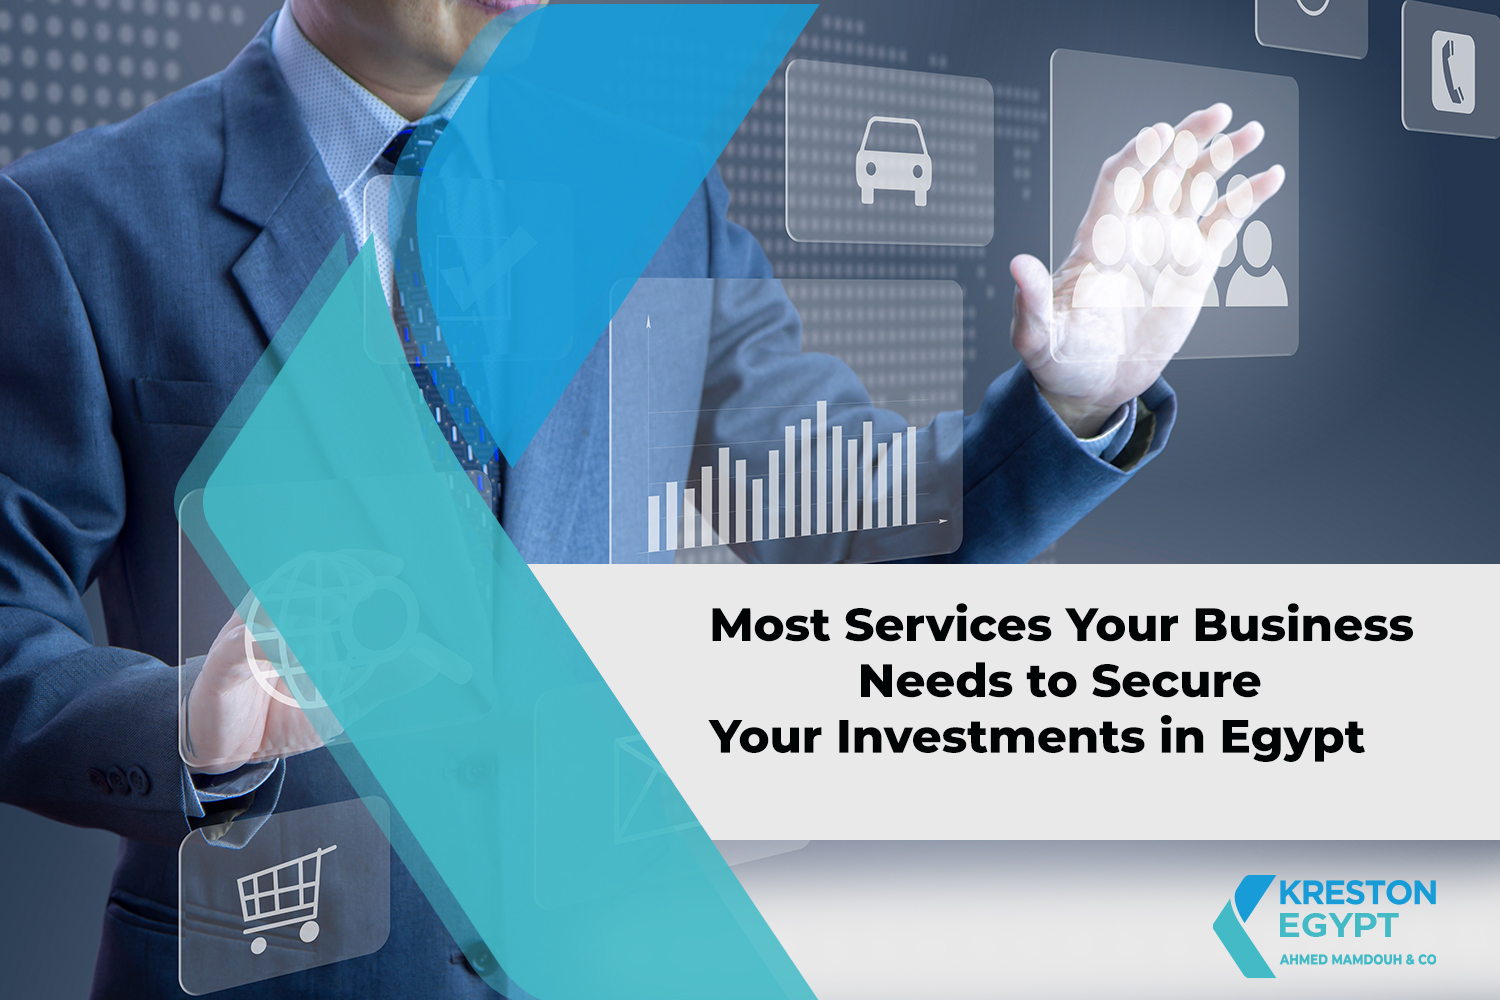 Most Services Your Business Needs to Secure Your Investments in Egypt